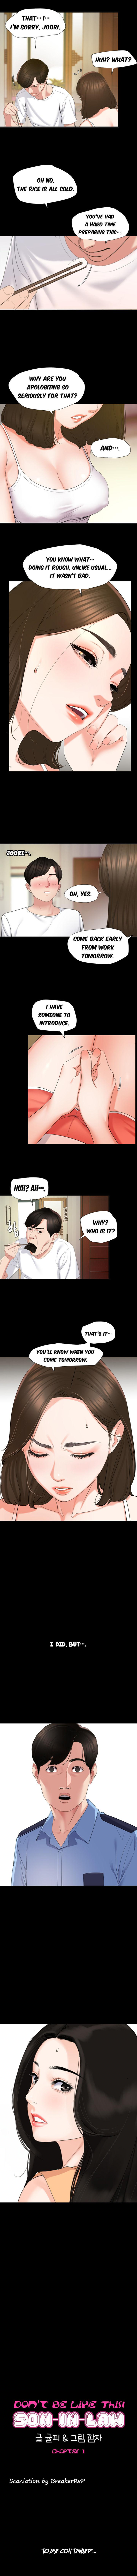 [kkamja] Don't Be Like This! Son-In-Law [English] [Ongoing] 7